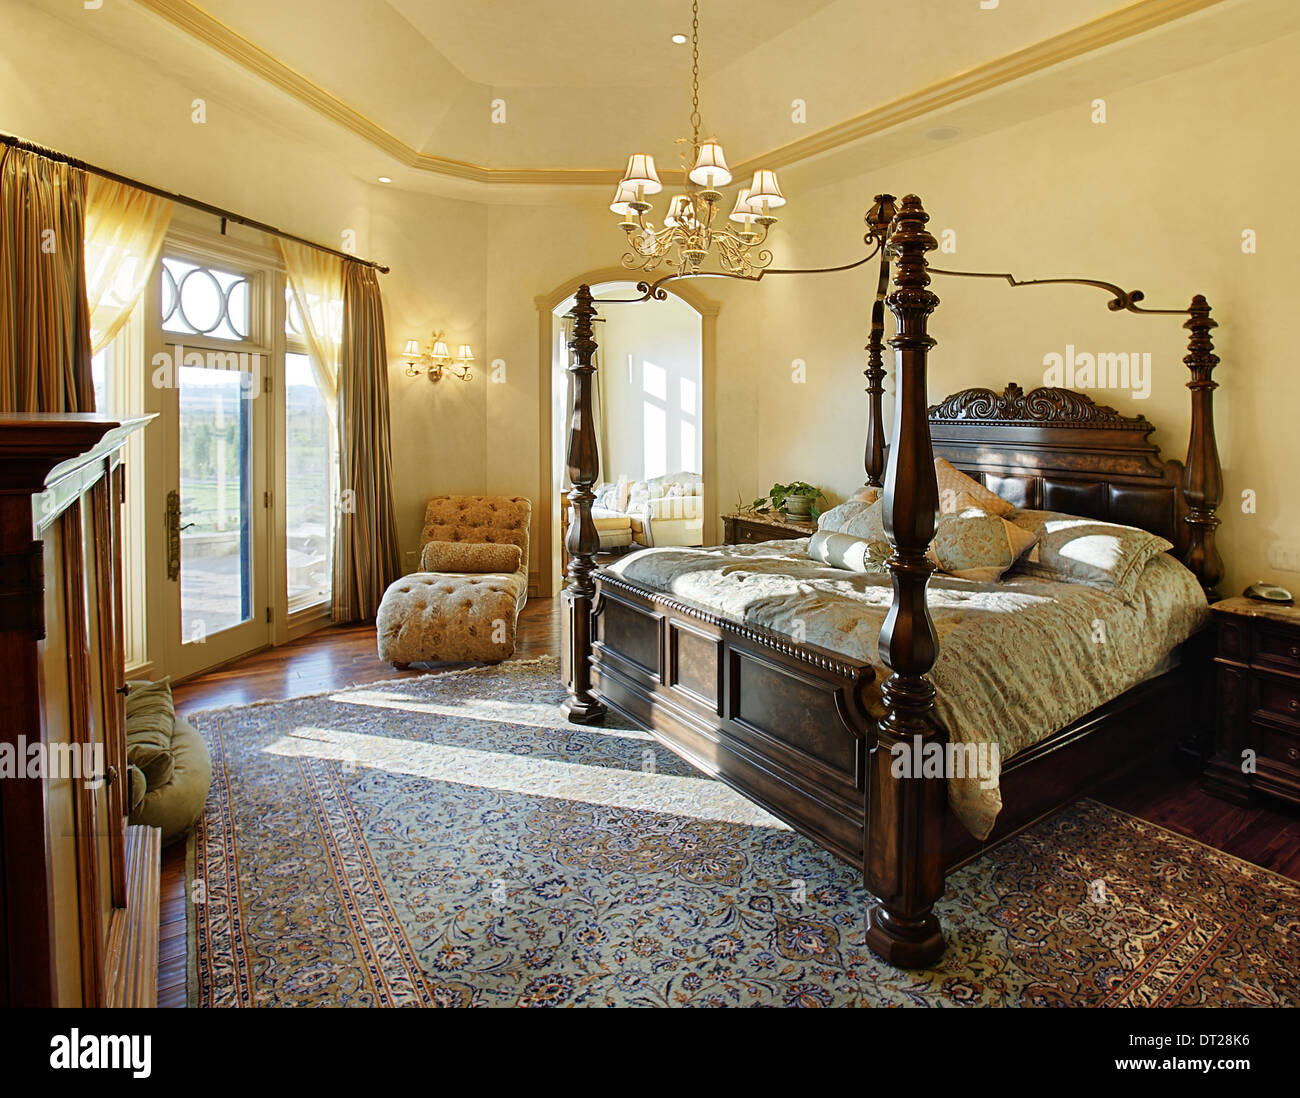 The luxury master bedroom in an upscale residence. Stock Photo